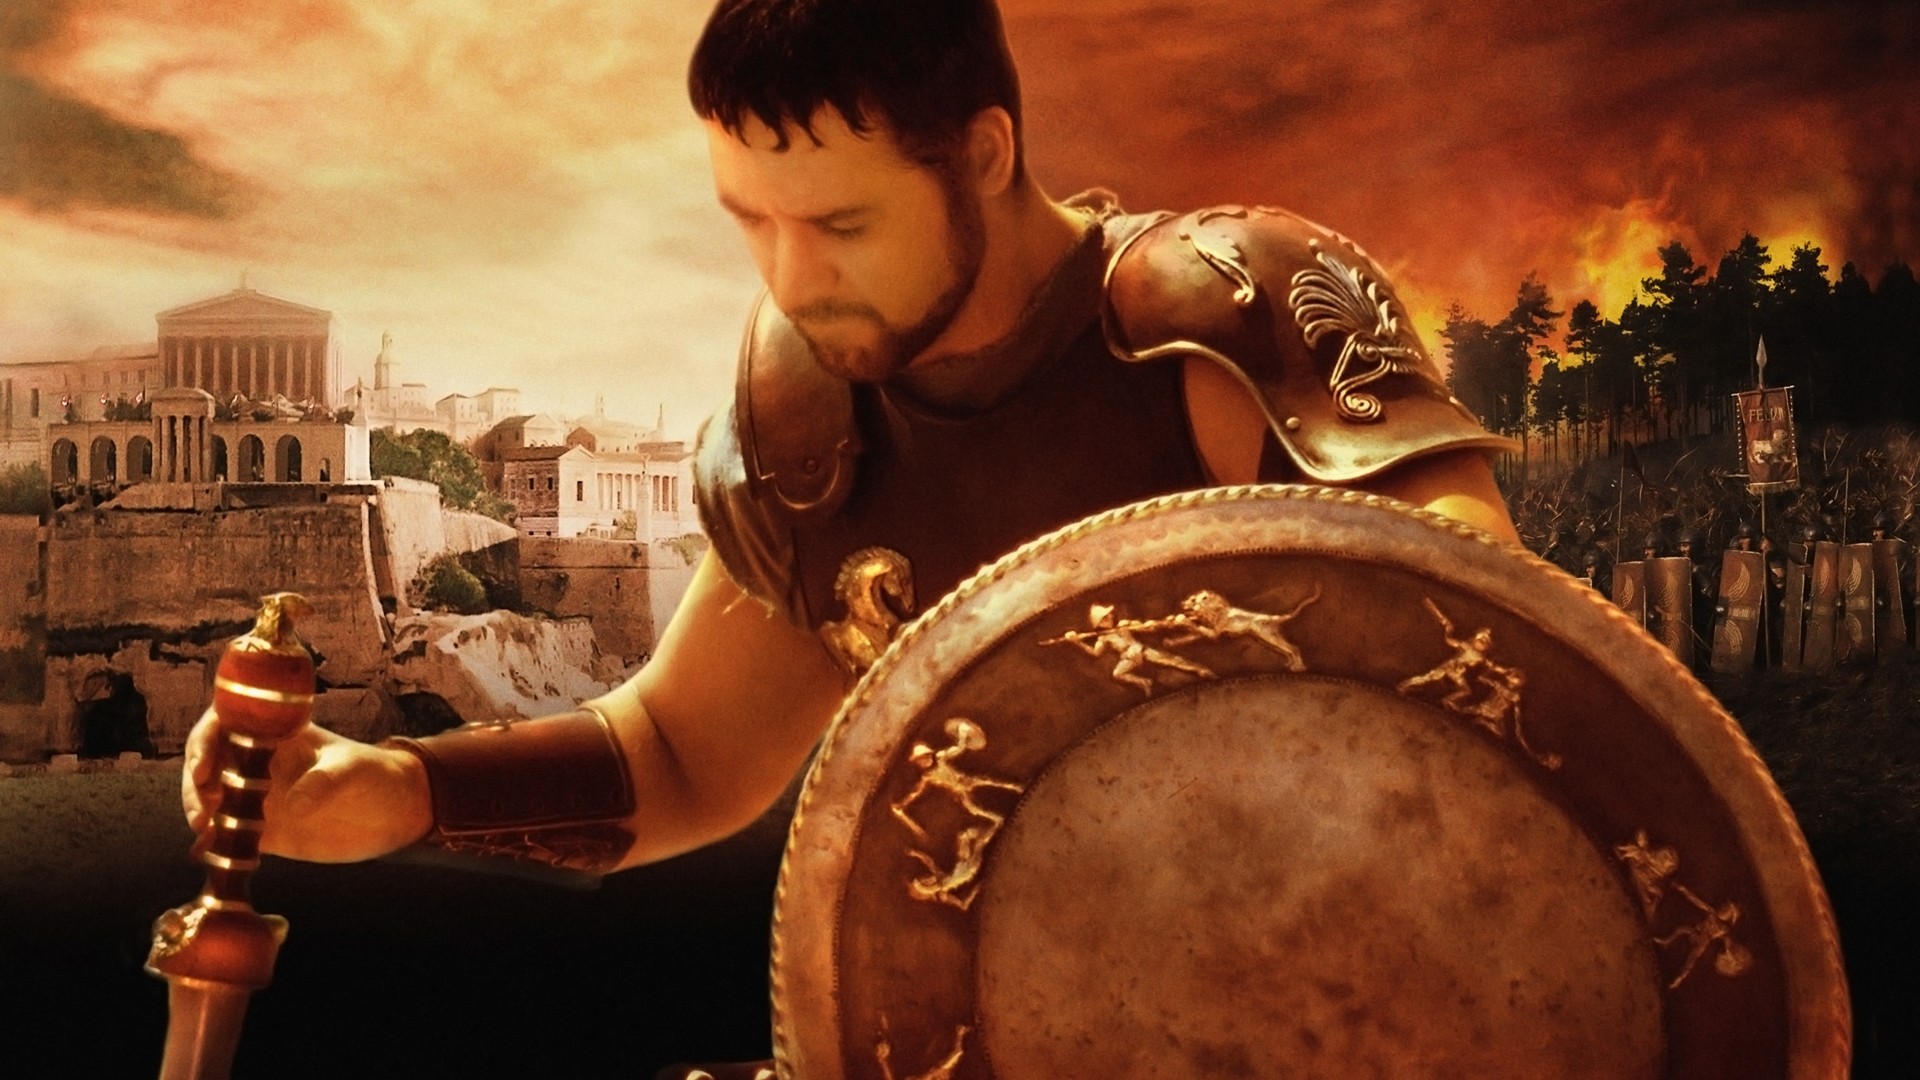 Gladiator Movie Russell Crowe Wallpaper Background